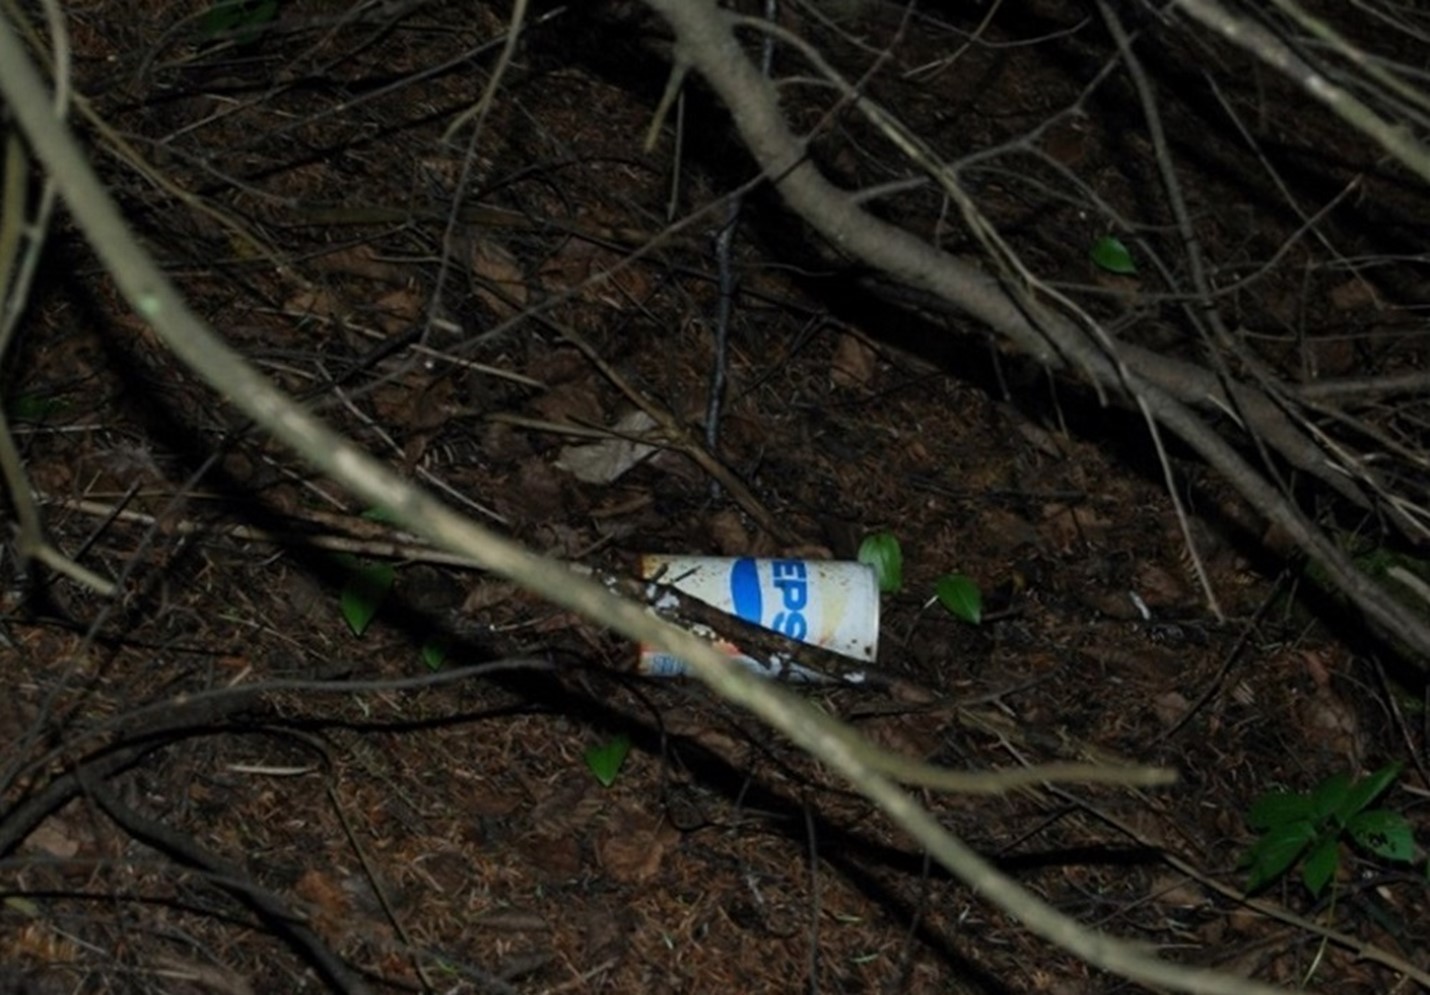 A faded Pepsi pop can, likely from the 1980s, discarded and resting behind tree branches on the forest floor